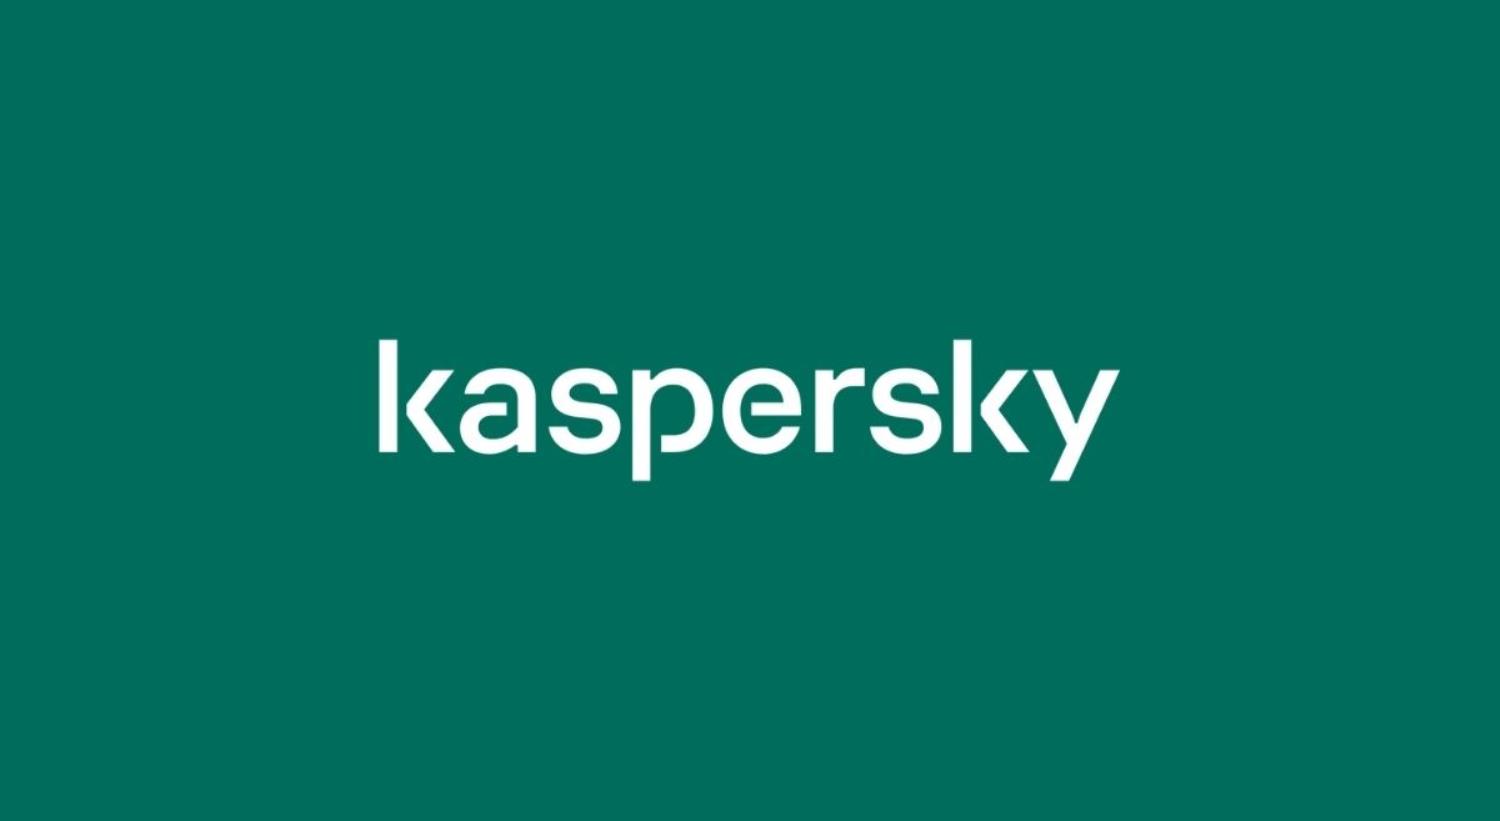 Kaspersky Endpoint Security for Business Advanced